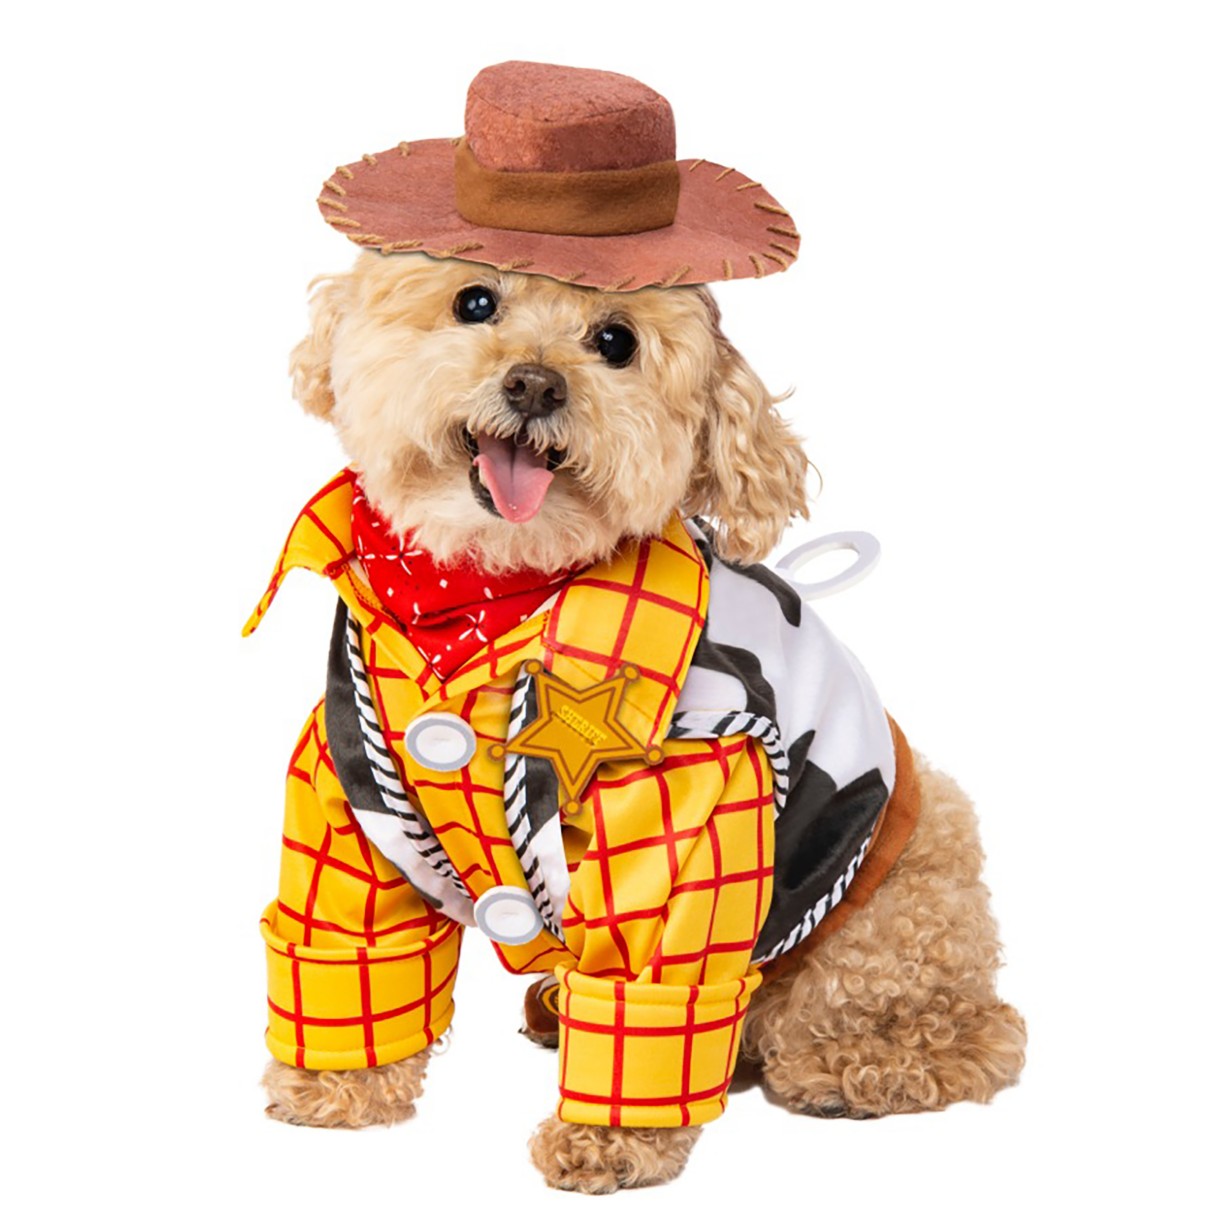 Woody Pet Costume by Rubies – Toy Story